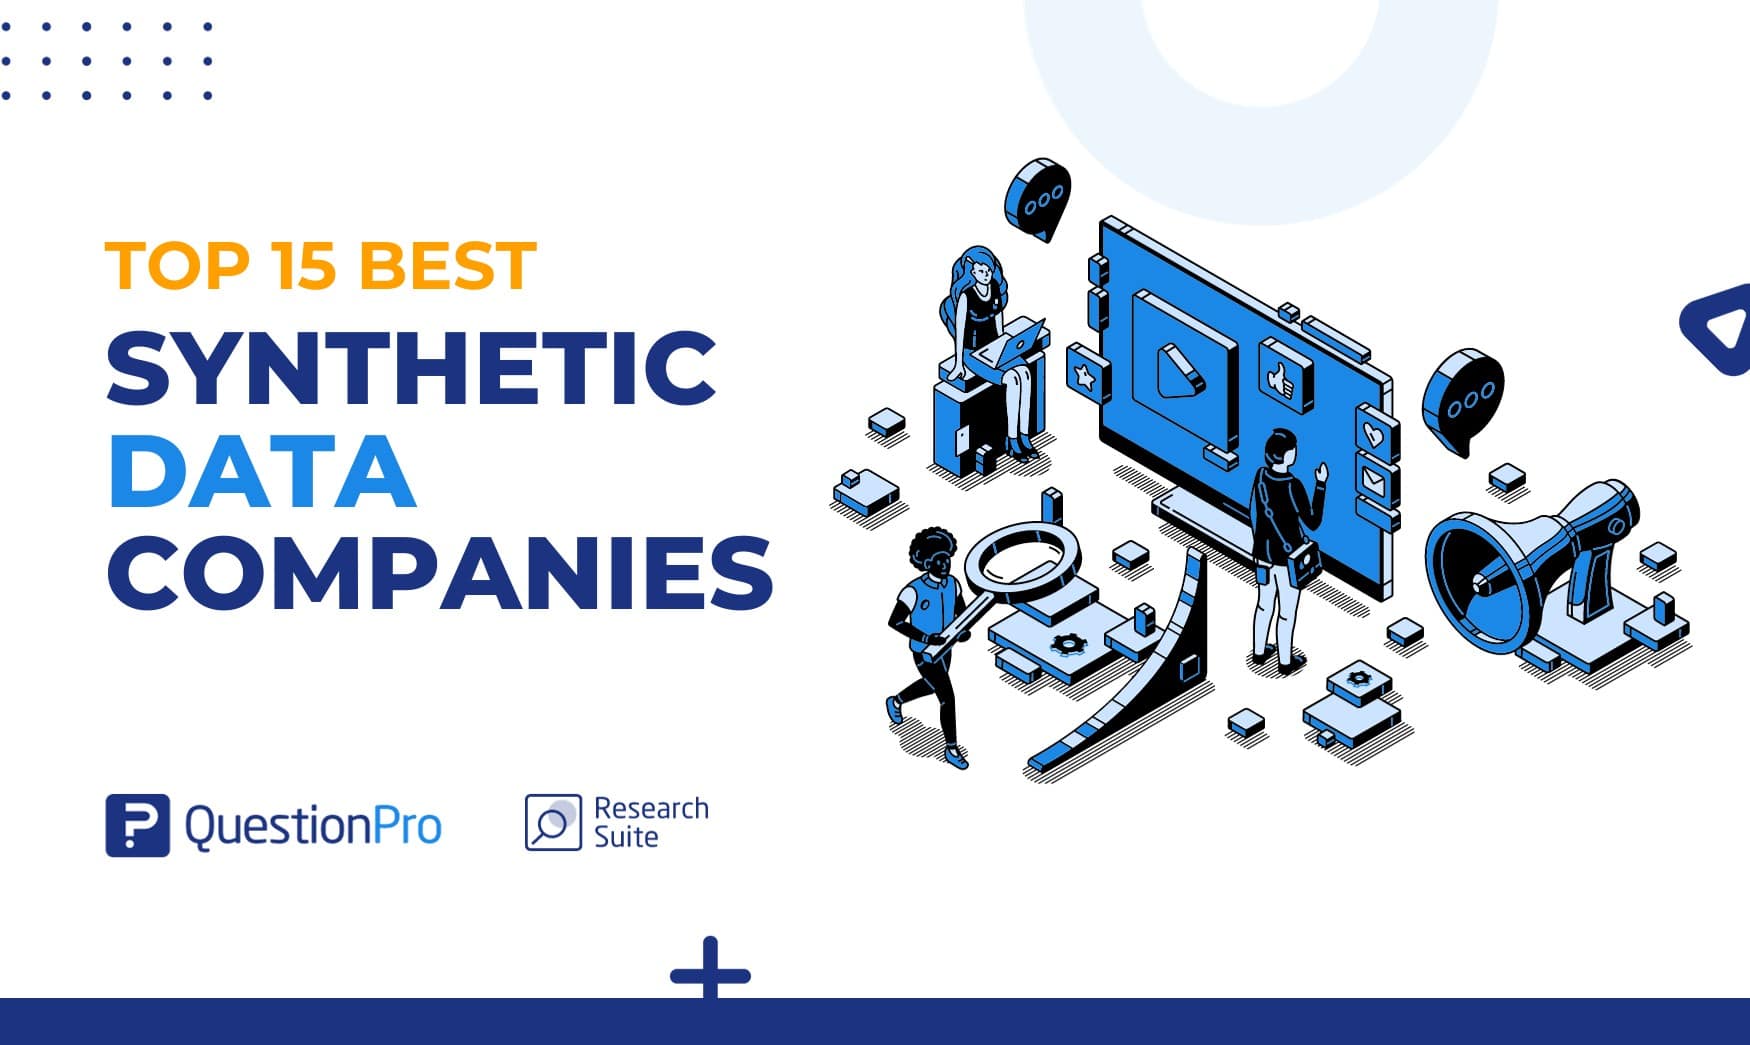 Top 15 synthetic data companies in 2023, offering cutting-edge solutions for your data needs. Find the perfect partner to gain insights.